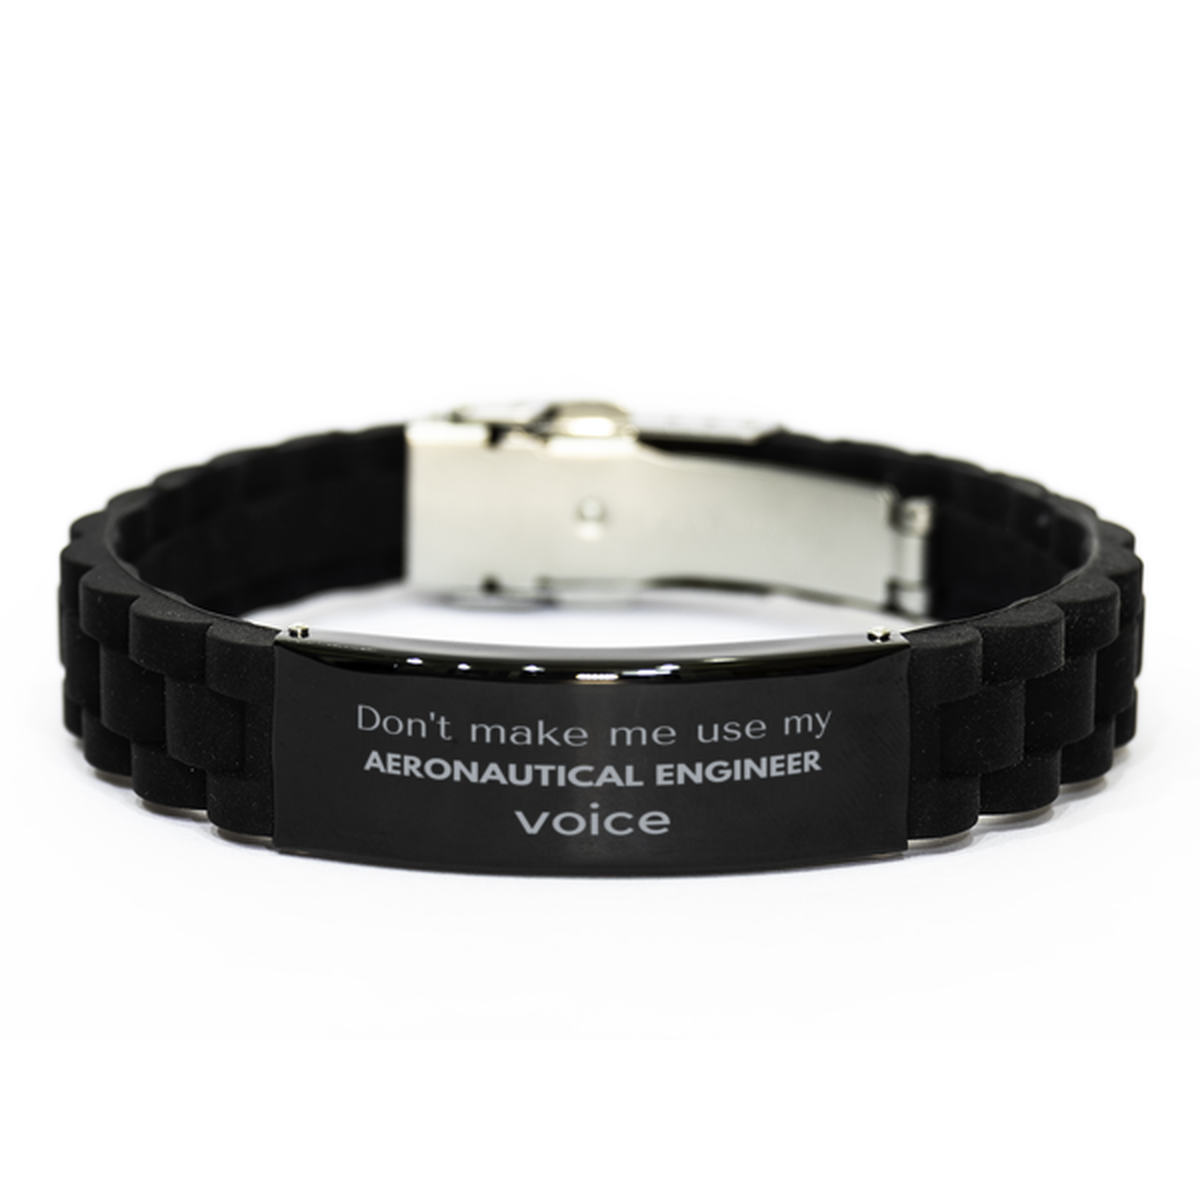 Don't make me use my Aeronautical Engineer voice, Sarcasm Aeronautical Engineer Gifts, Christmas Aeronautical Engineer Black Glidelock Clasp Bracelet Birthday Unique Gifts For Aeronautical Engineer Coworkers, Men, Women, Colleague, Friends